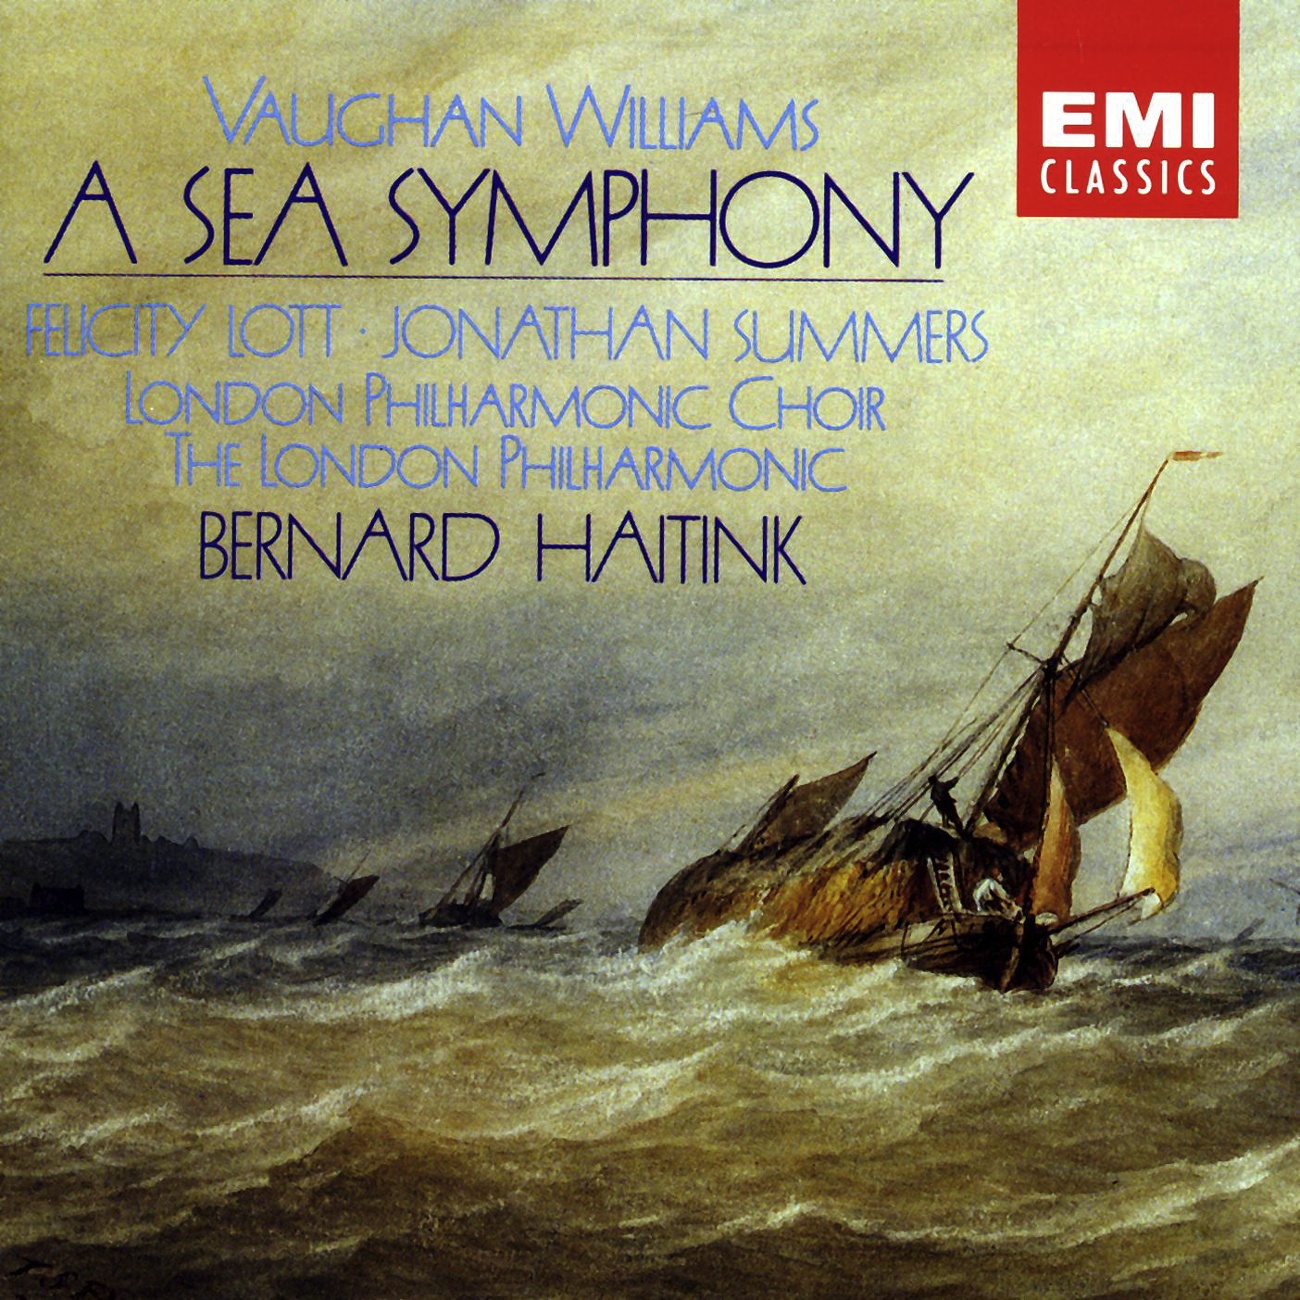 Vaughan Williams: A Sea Symphony: I. A Song For All Seas, Flaunt Out, O Sea, Your Separate Flags Of Nations!